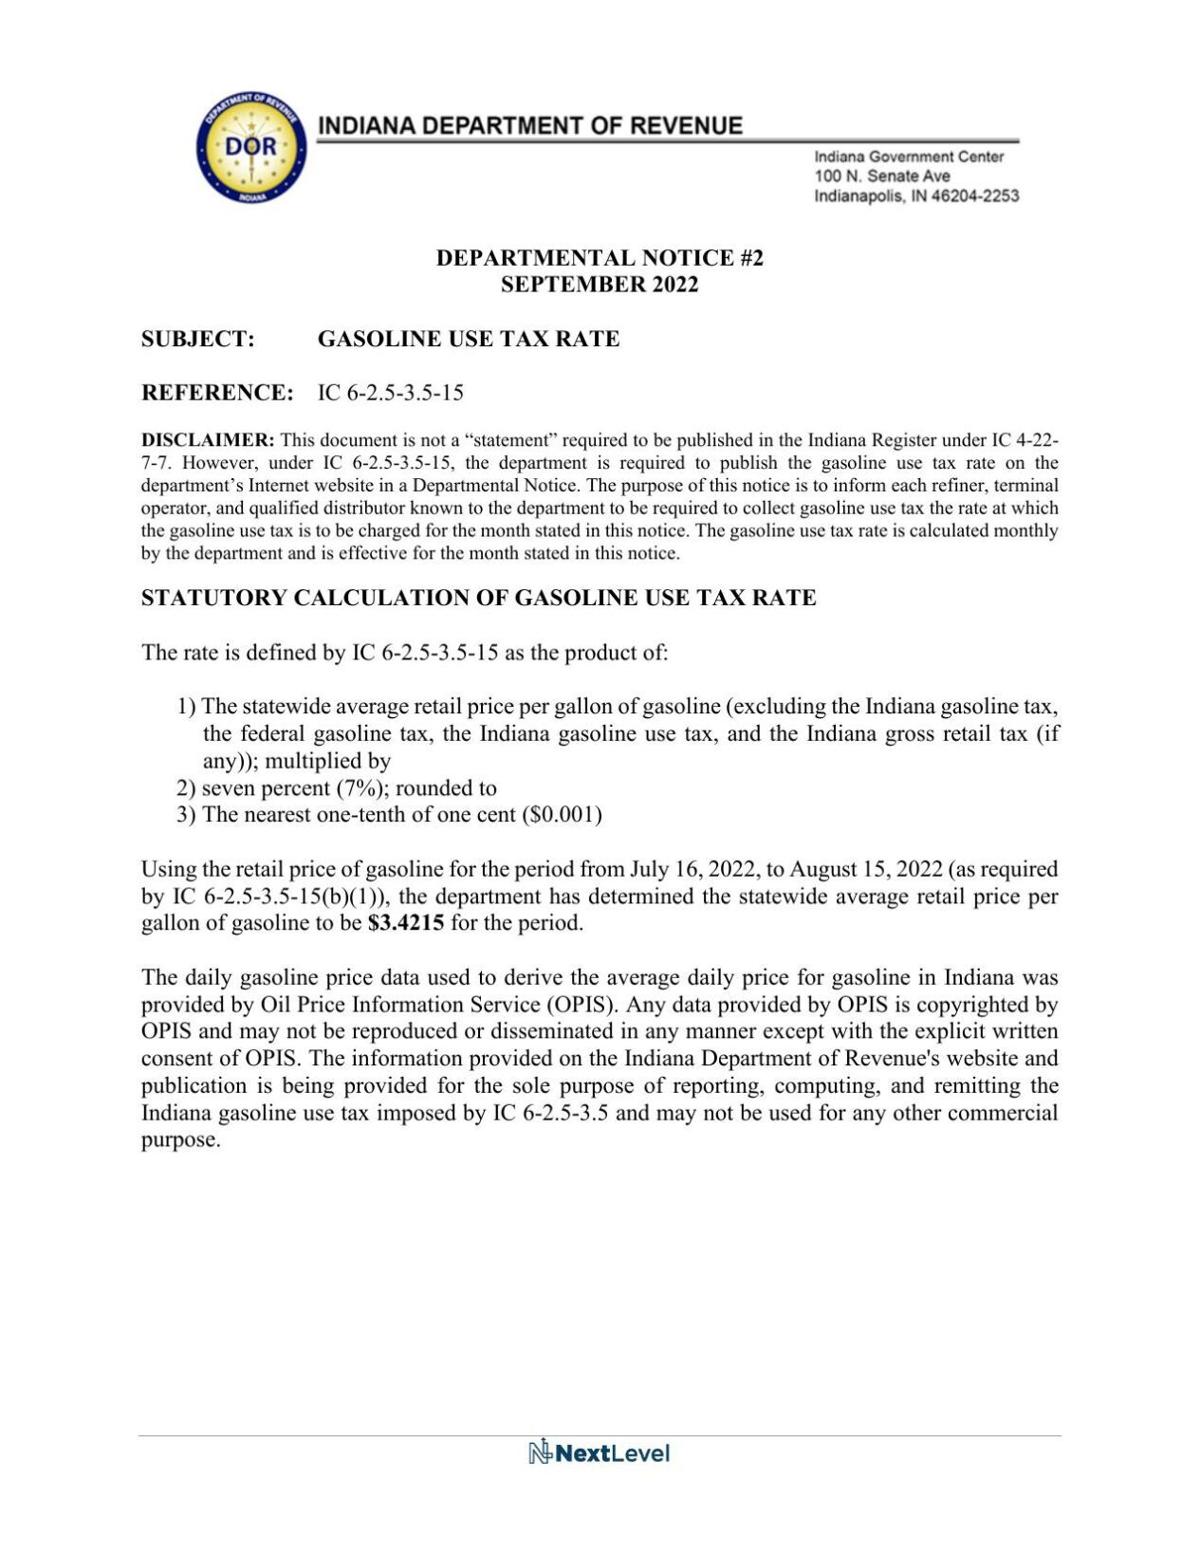 Notice of Indiana's applied gasoline sales tax rate for September 2022